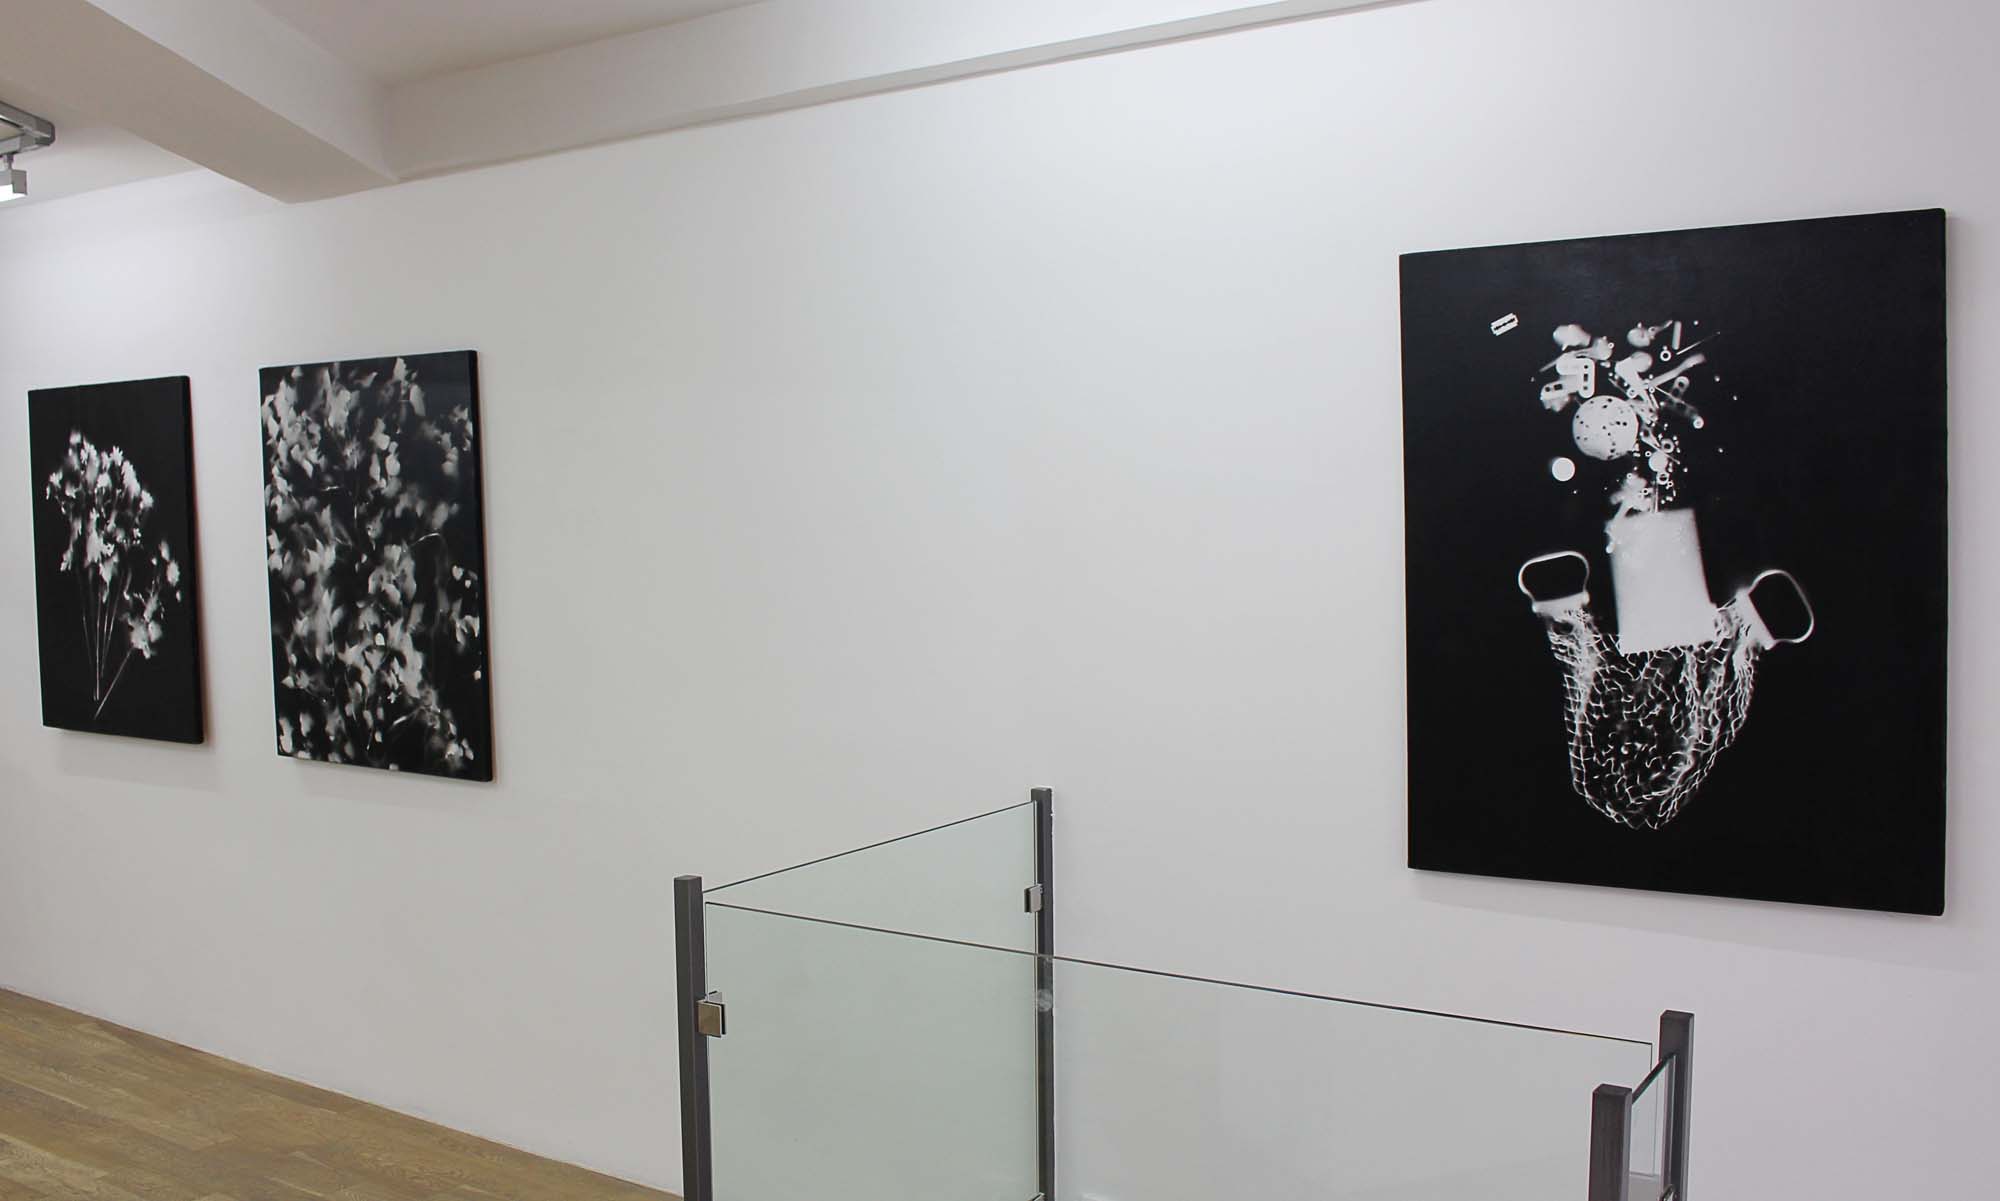 François Arnal, Bombardements exhibition view, October 2017